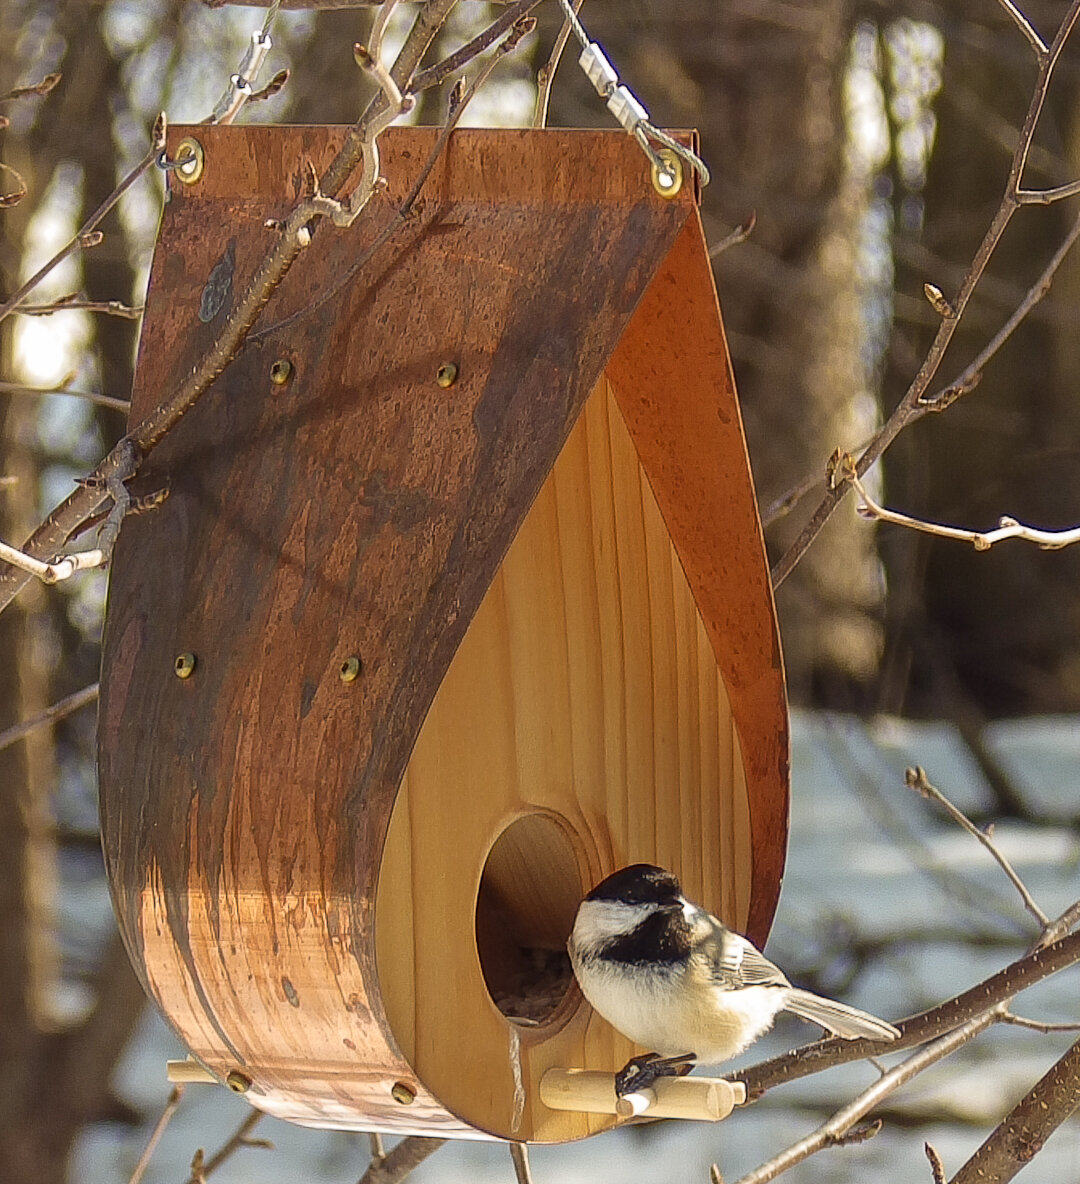 Our QandA feeder didn’t take long to attract the local Chickadees. The copper roof is beginning to patina after arriving with a gorgeous shiny copper roof.